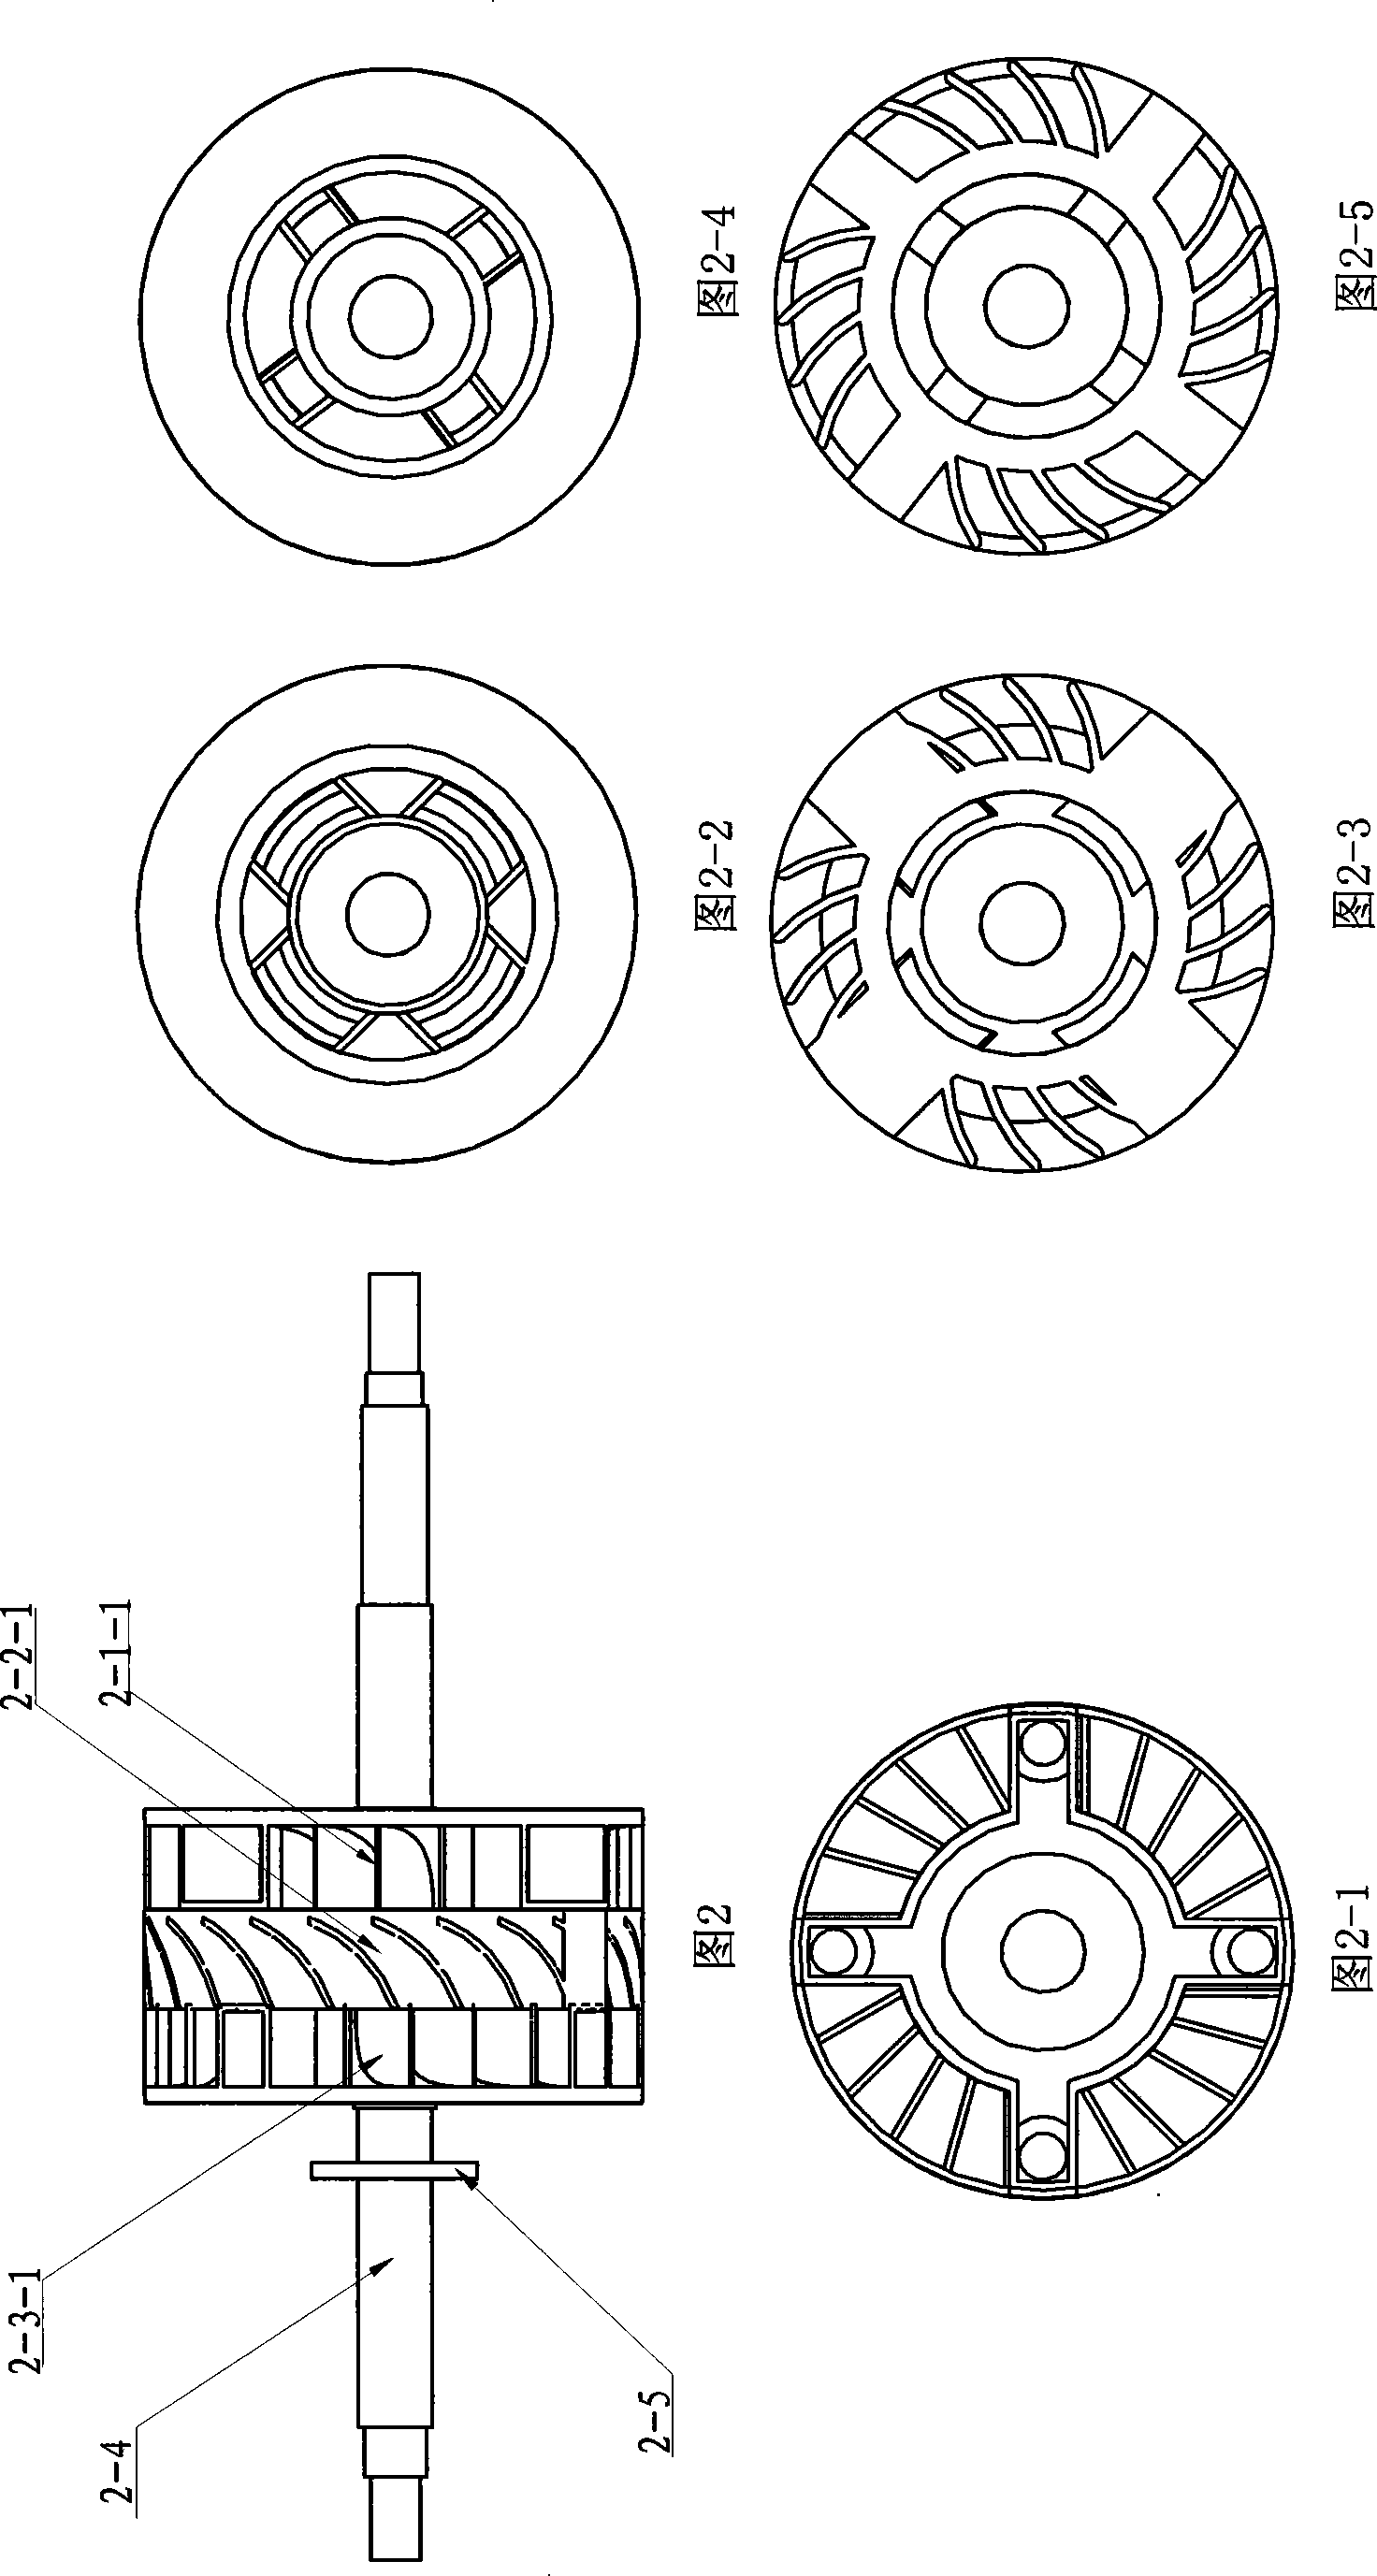 Side combustion type rotor internal combustion engine